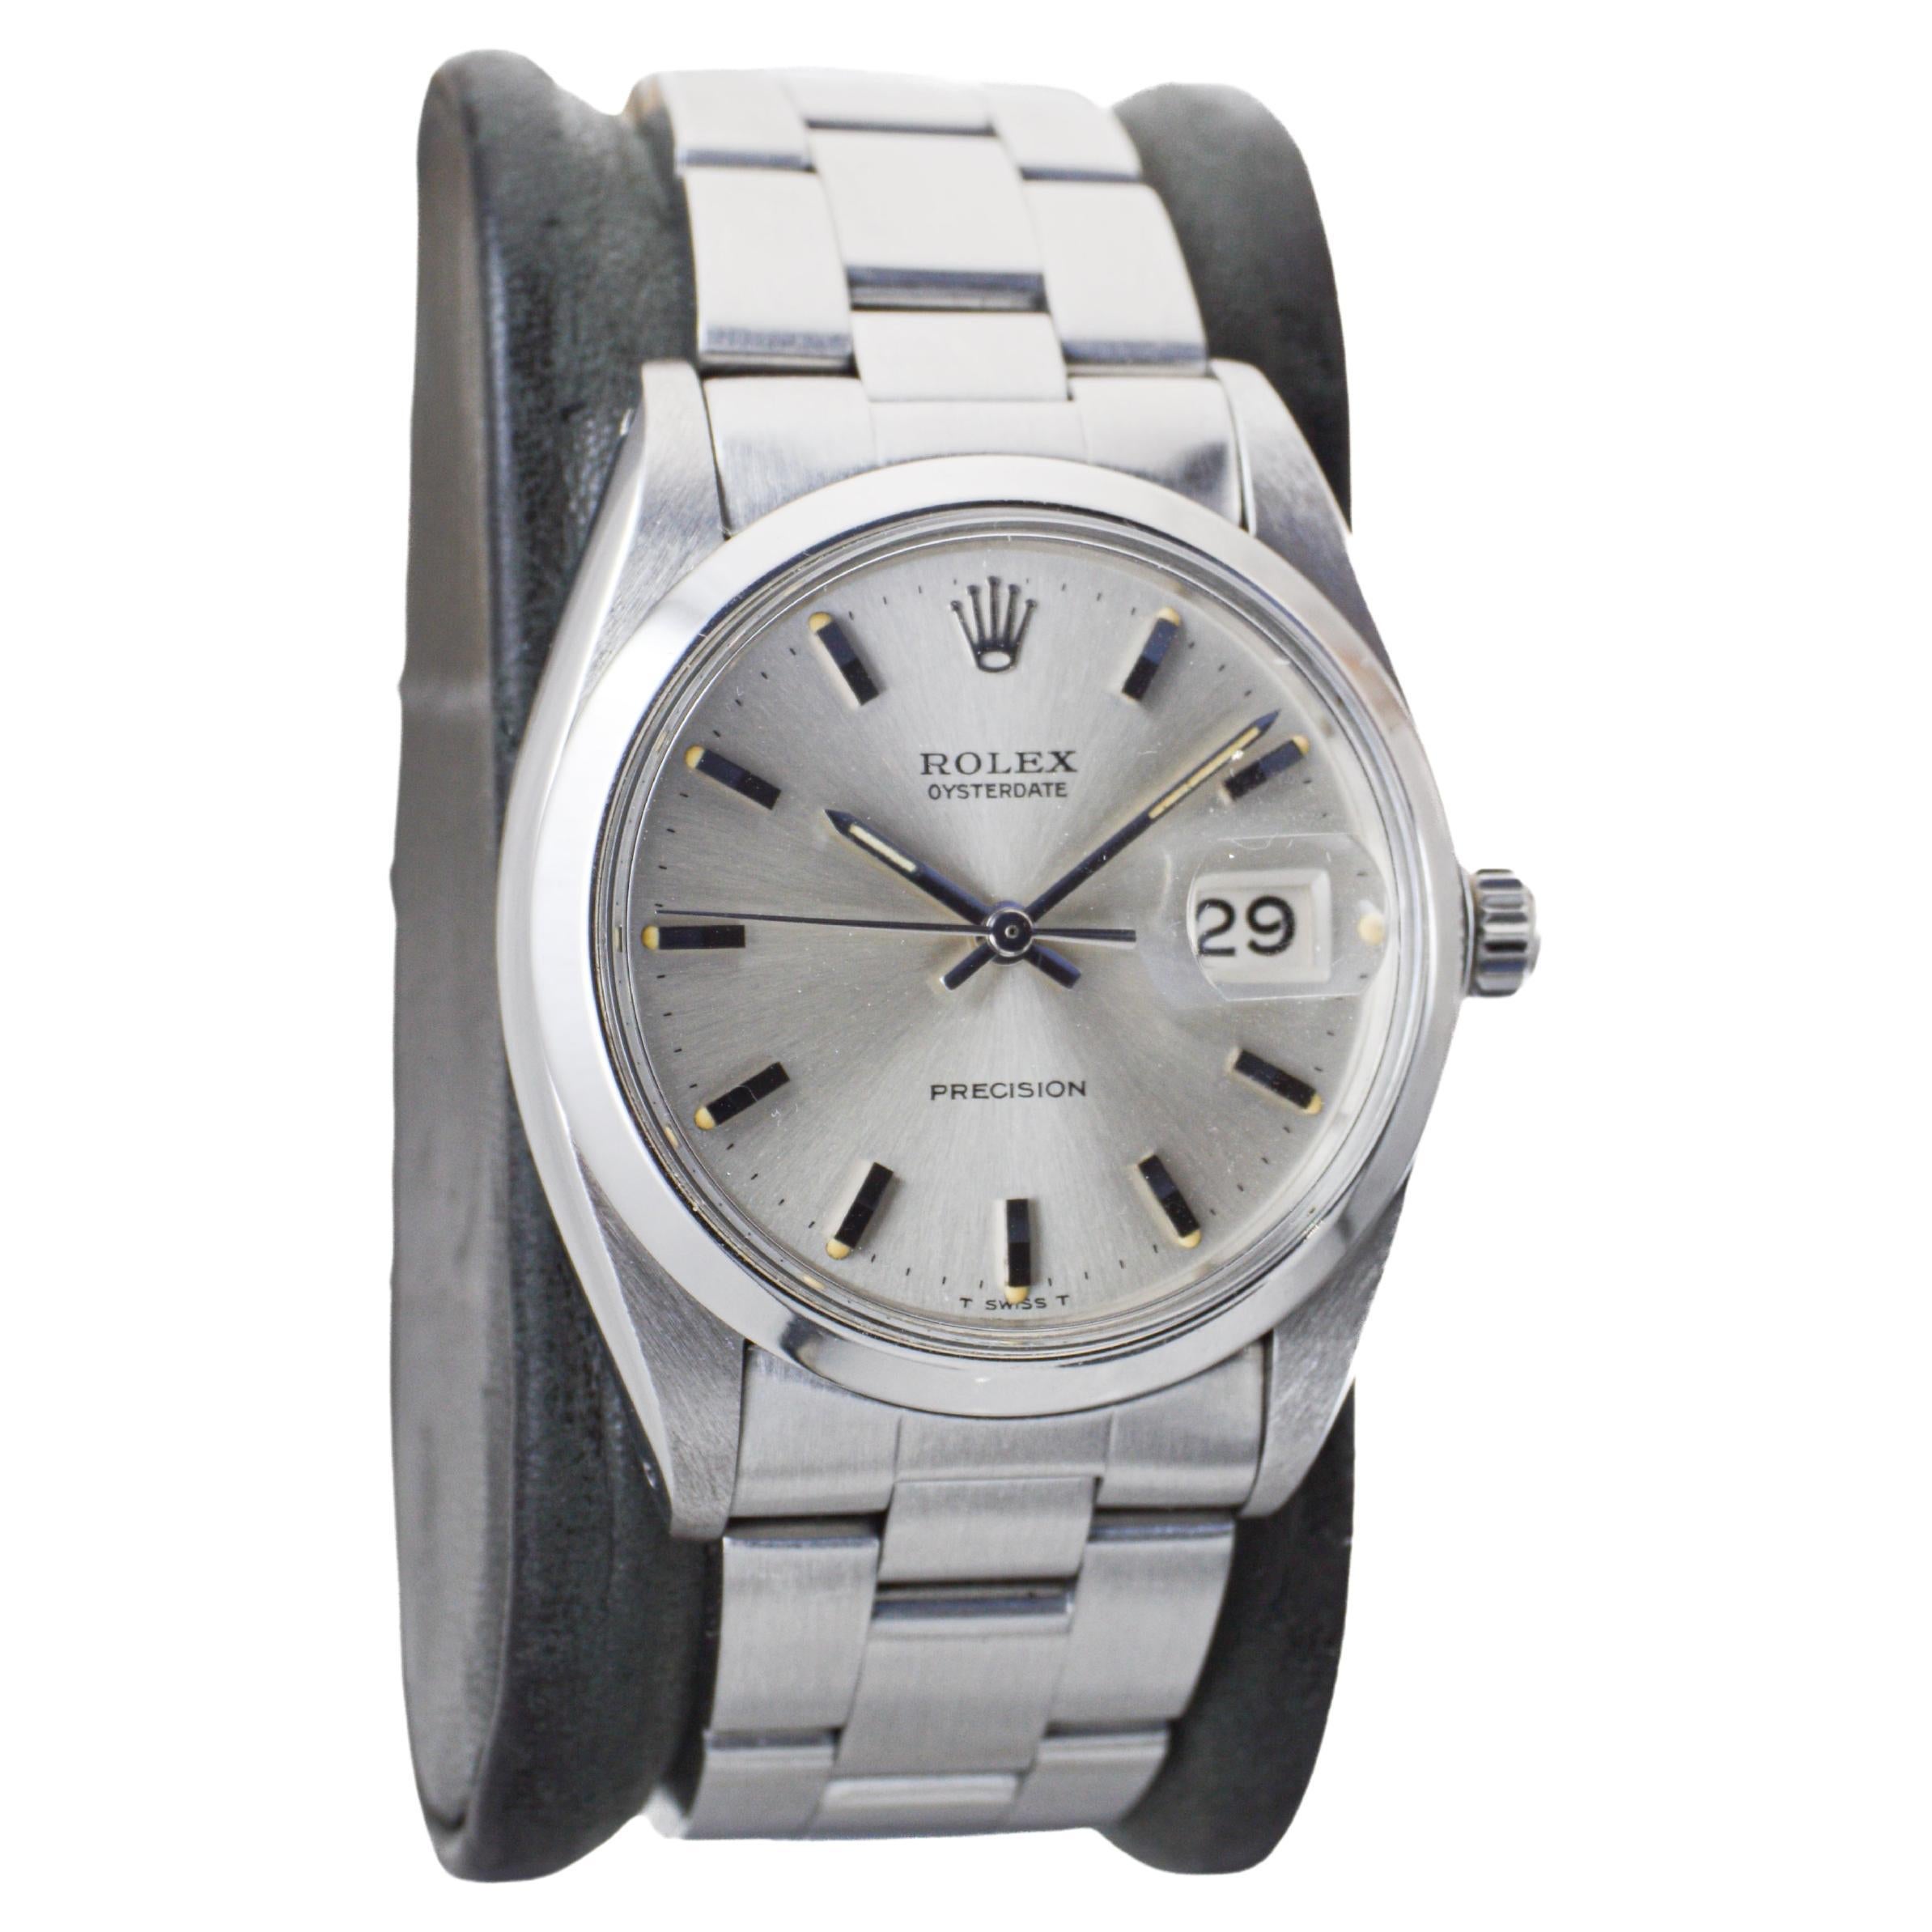 FACTORY / HOUSE: Rolex Watch Company
STYLE / REFERENCE: Oysterdate / Reference 6694
METAL / MATERIAL: Stainless Steel
CIRCA / YEAR: 1967
DIMENSIONS / SIZE: Length 42mm X Diameter 35mm
MOVEMENT / CALIBER: Manual Winding / 17 Jewels / Caliber